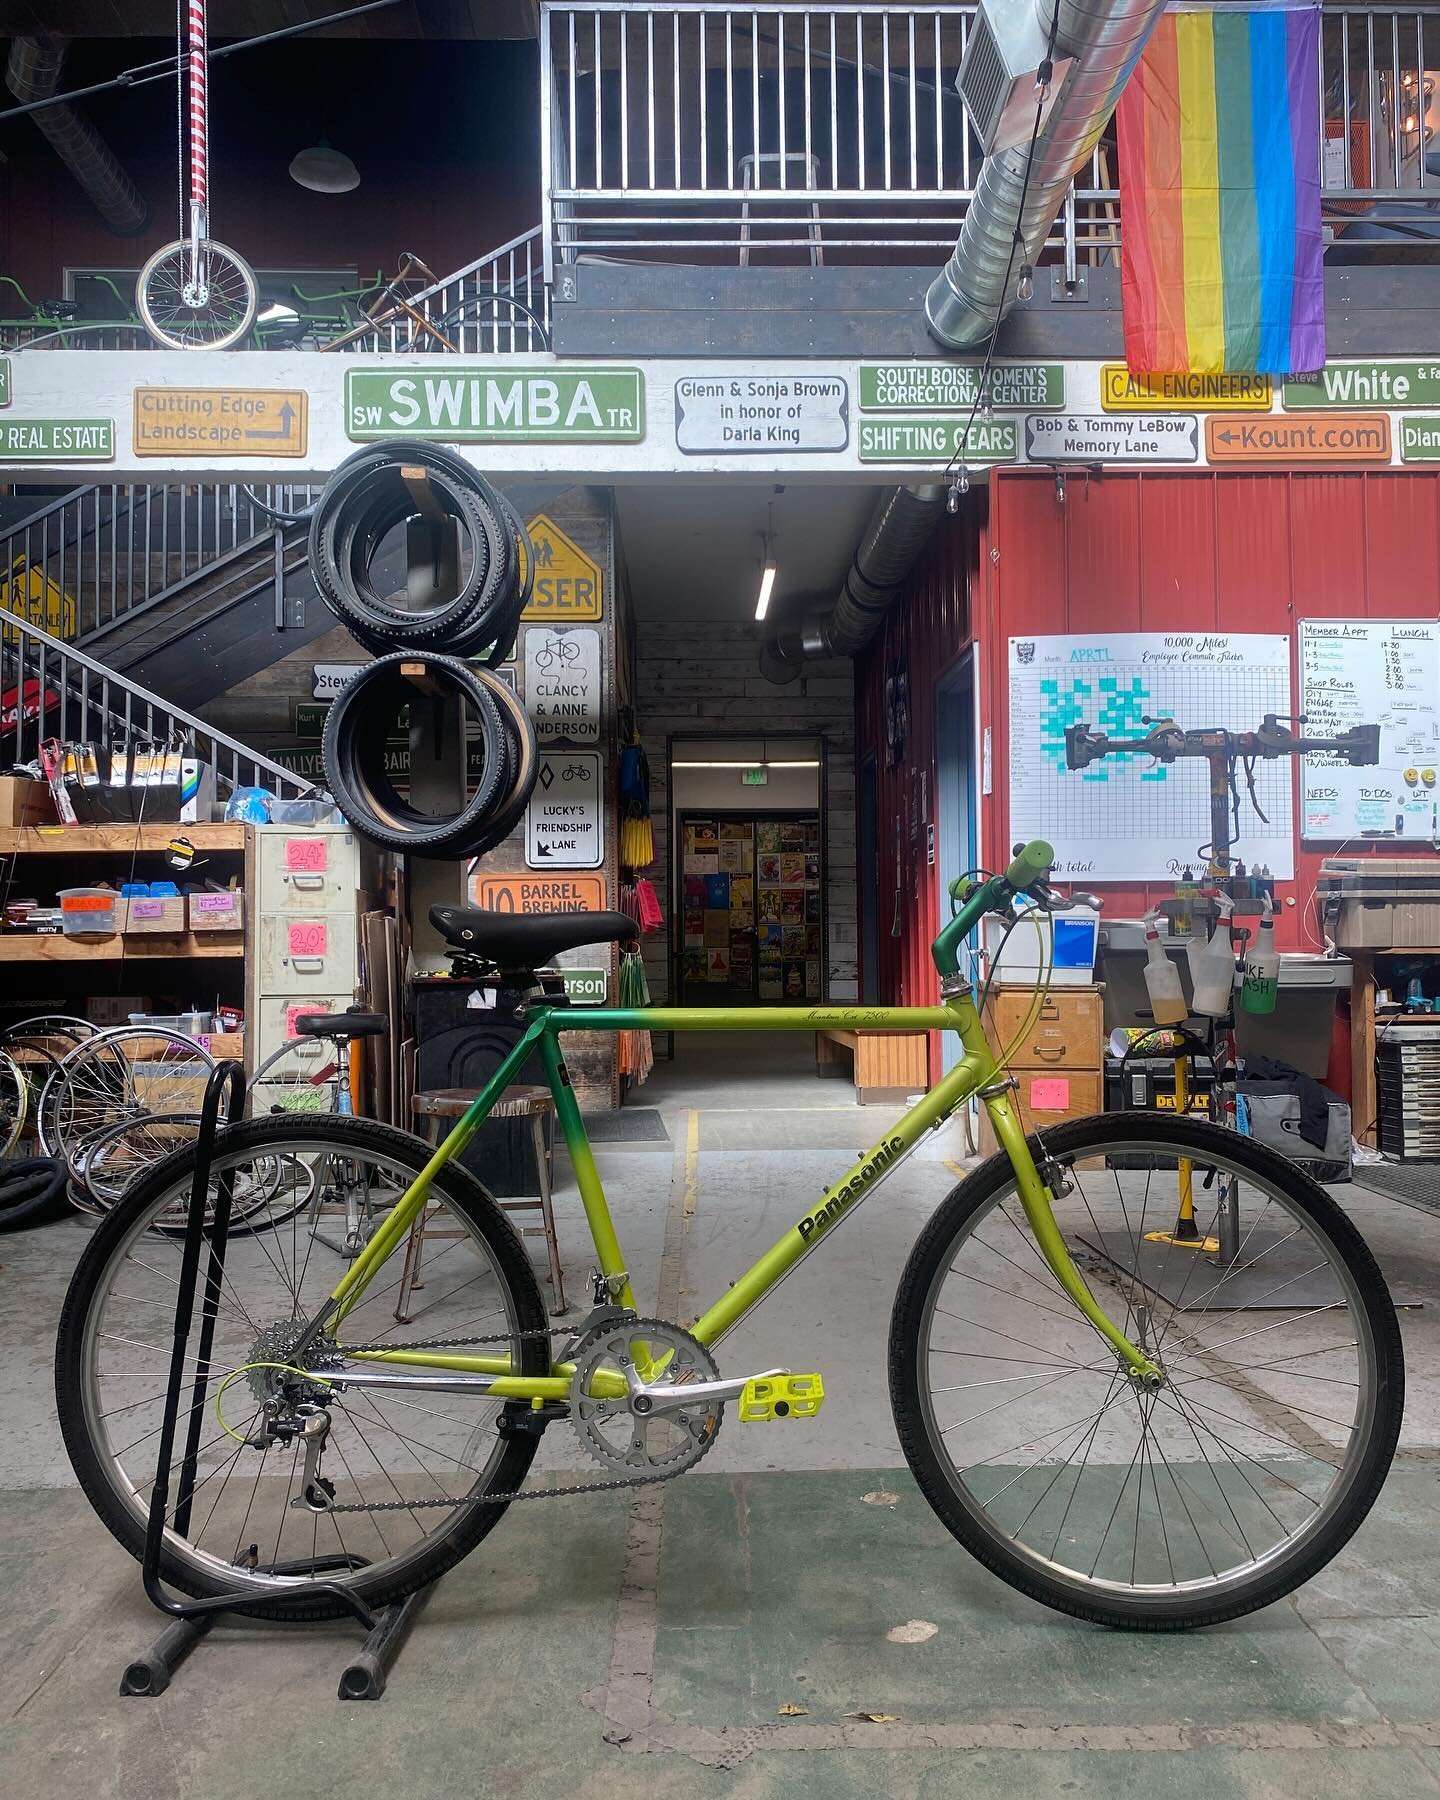 Did you know that when you purchase a refurbished bike from us, you can also score 15% off accessories? That means you can get a bike lock to keep your new bike safe or bike lights to help keep you safe! Or maybe you&rsquo;re looking to spice up your